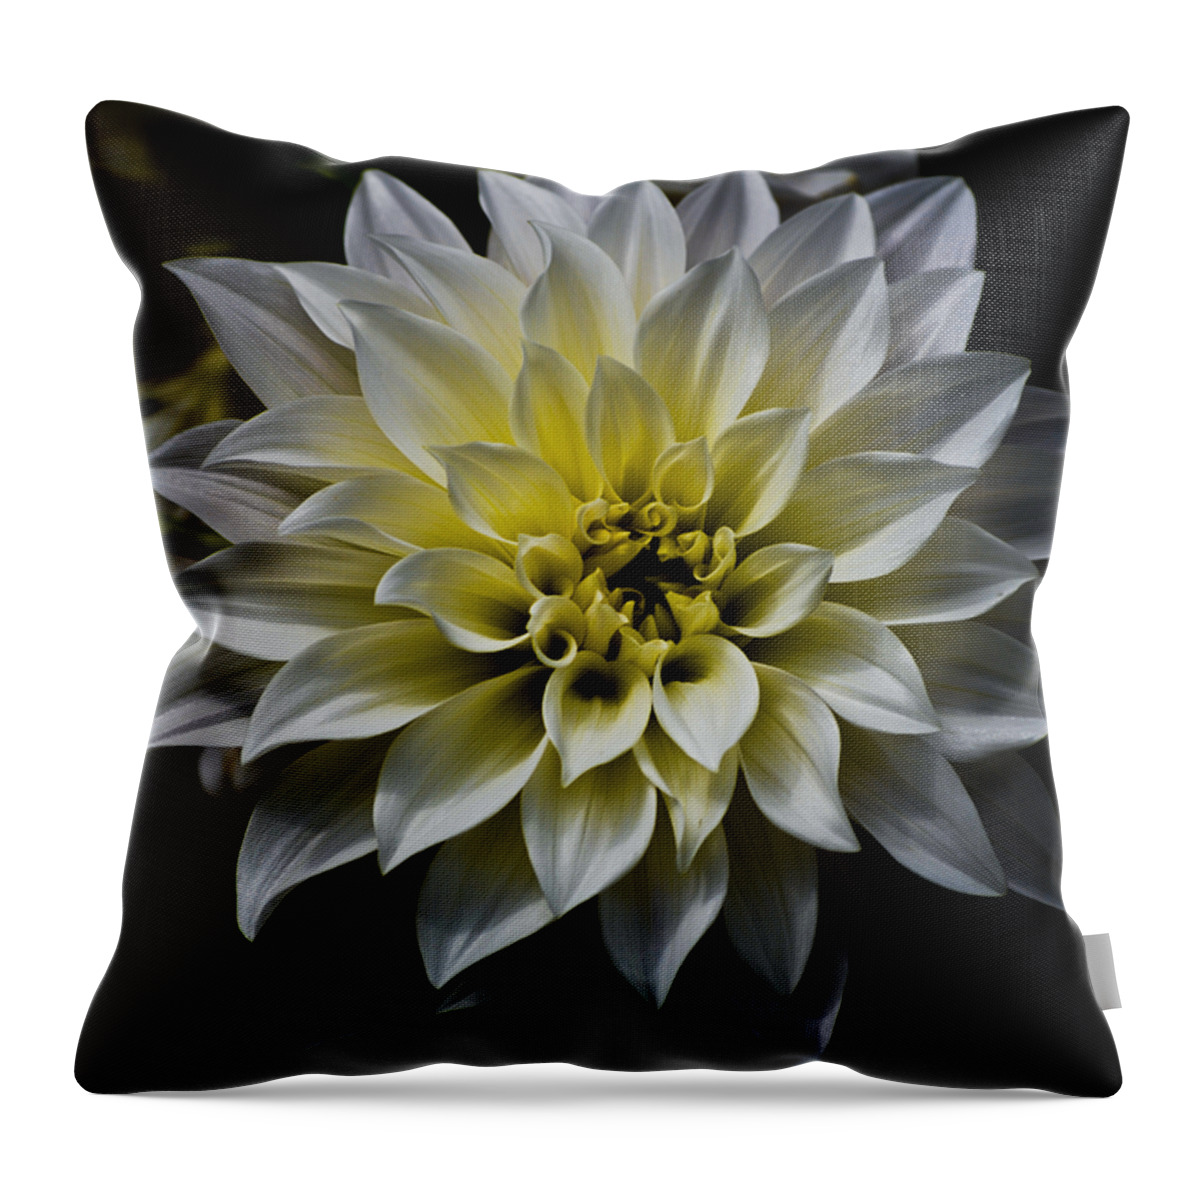 Botanical Throw Pillow featuring the photograph Inner Glow by Christi Kraft